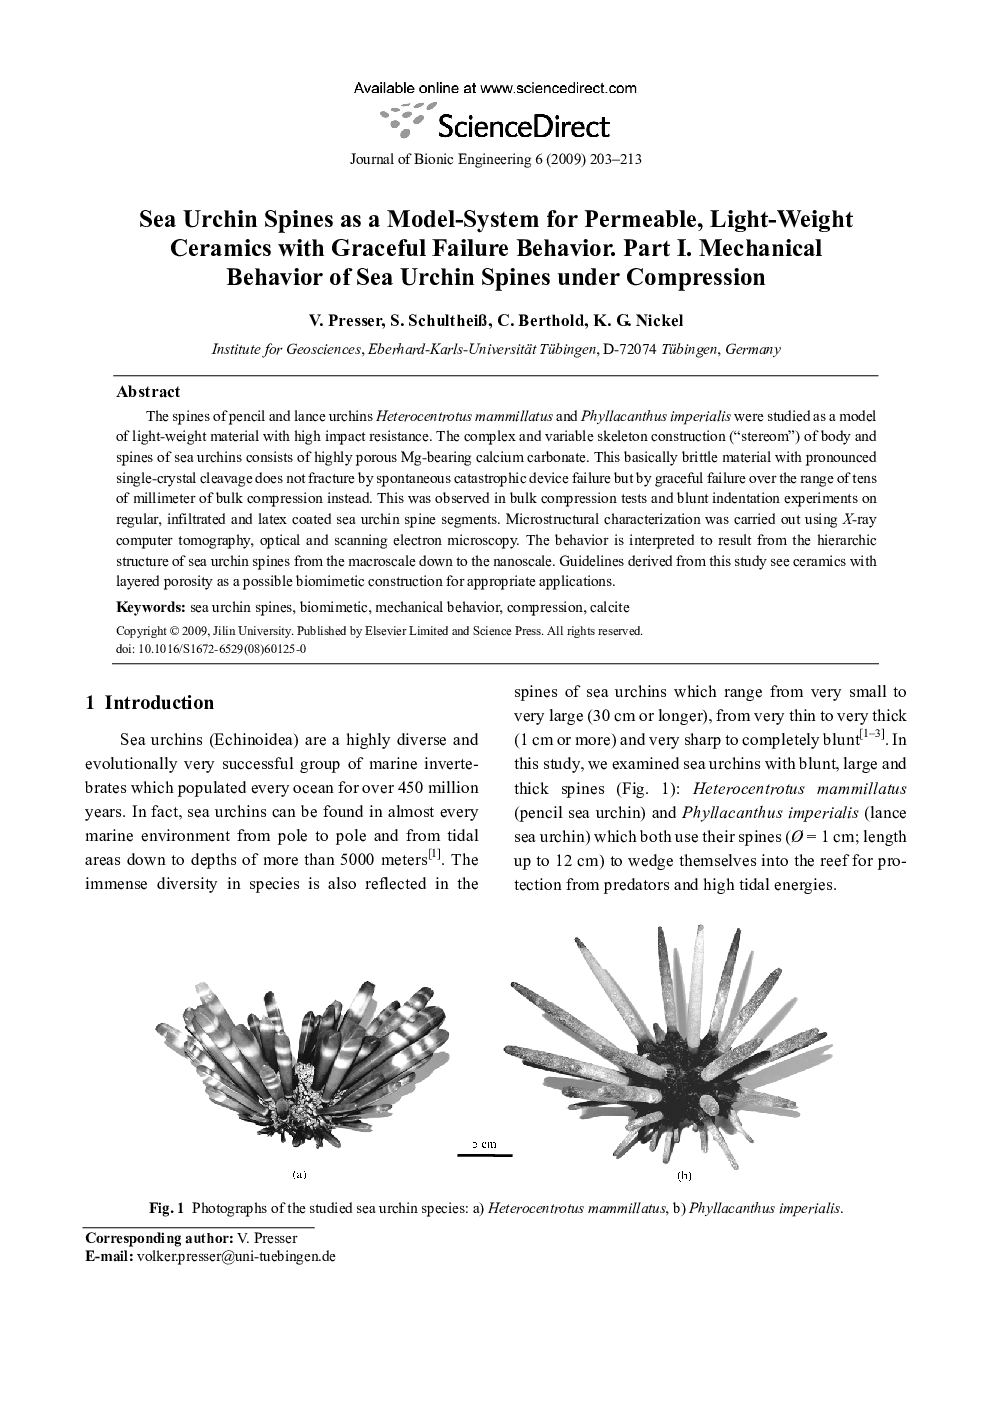 Sea Urchin Spines as a Model-System for Permeable, Light-Weight Ceramics with Graceful Failure Behavior. Part I. Mechanical Behavior of Sea Urchin Spines under Compression